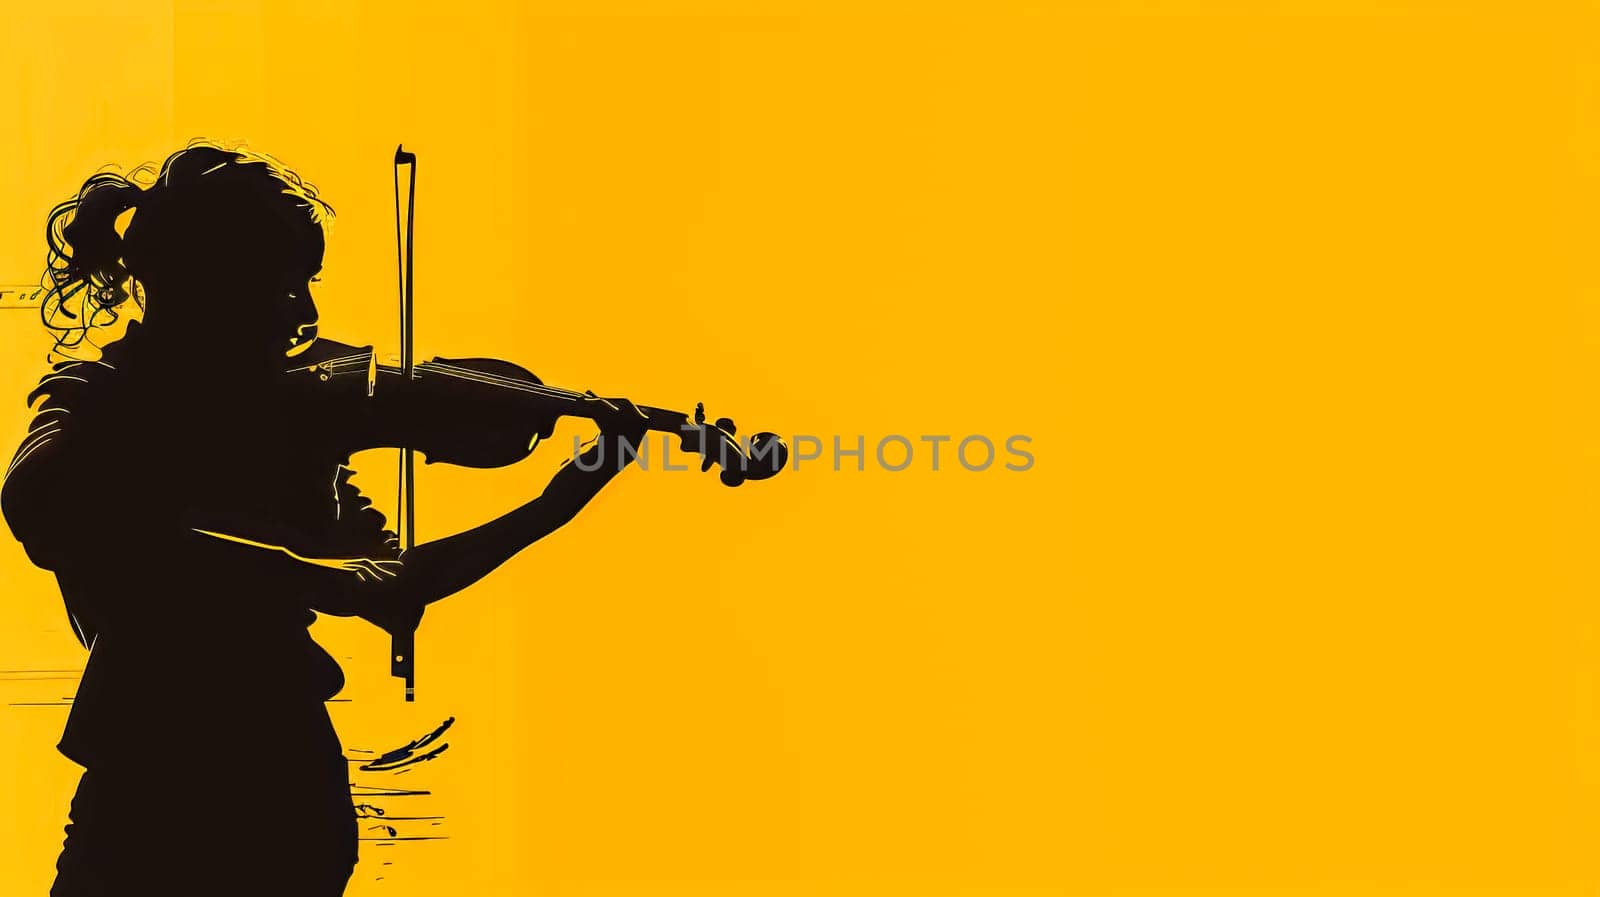 Elegant silhouette of a woman playing violin, vibrant yellow backdrop creating contrast